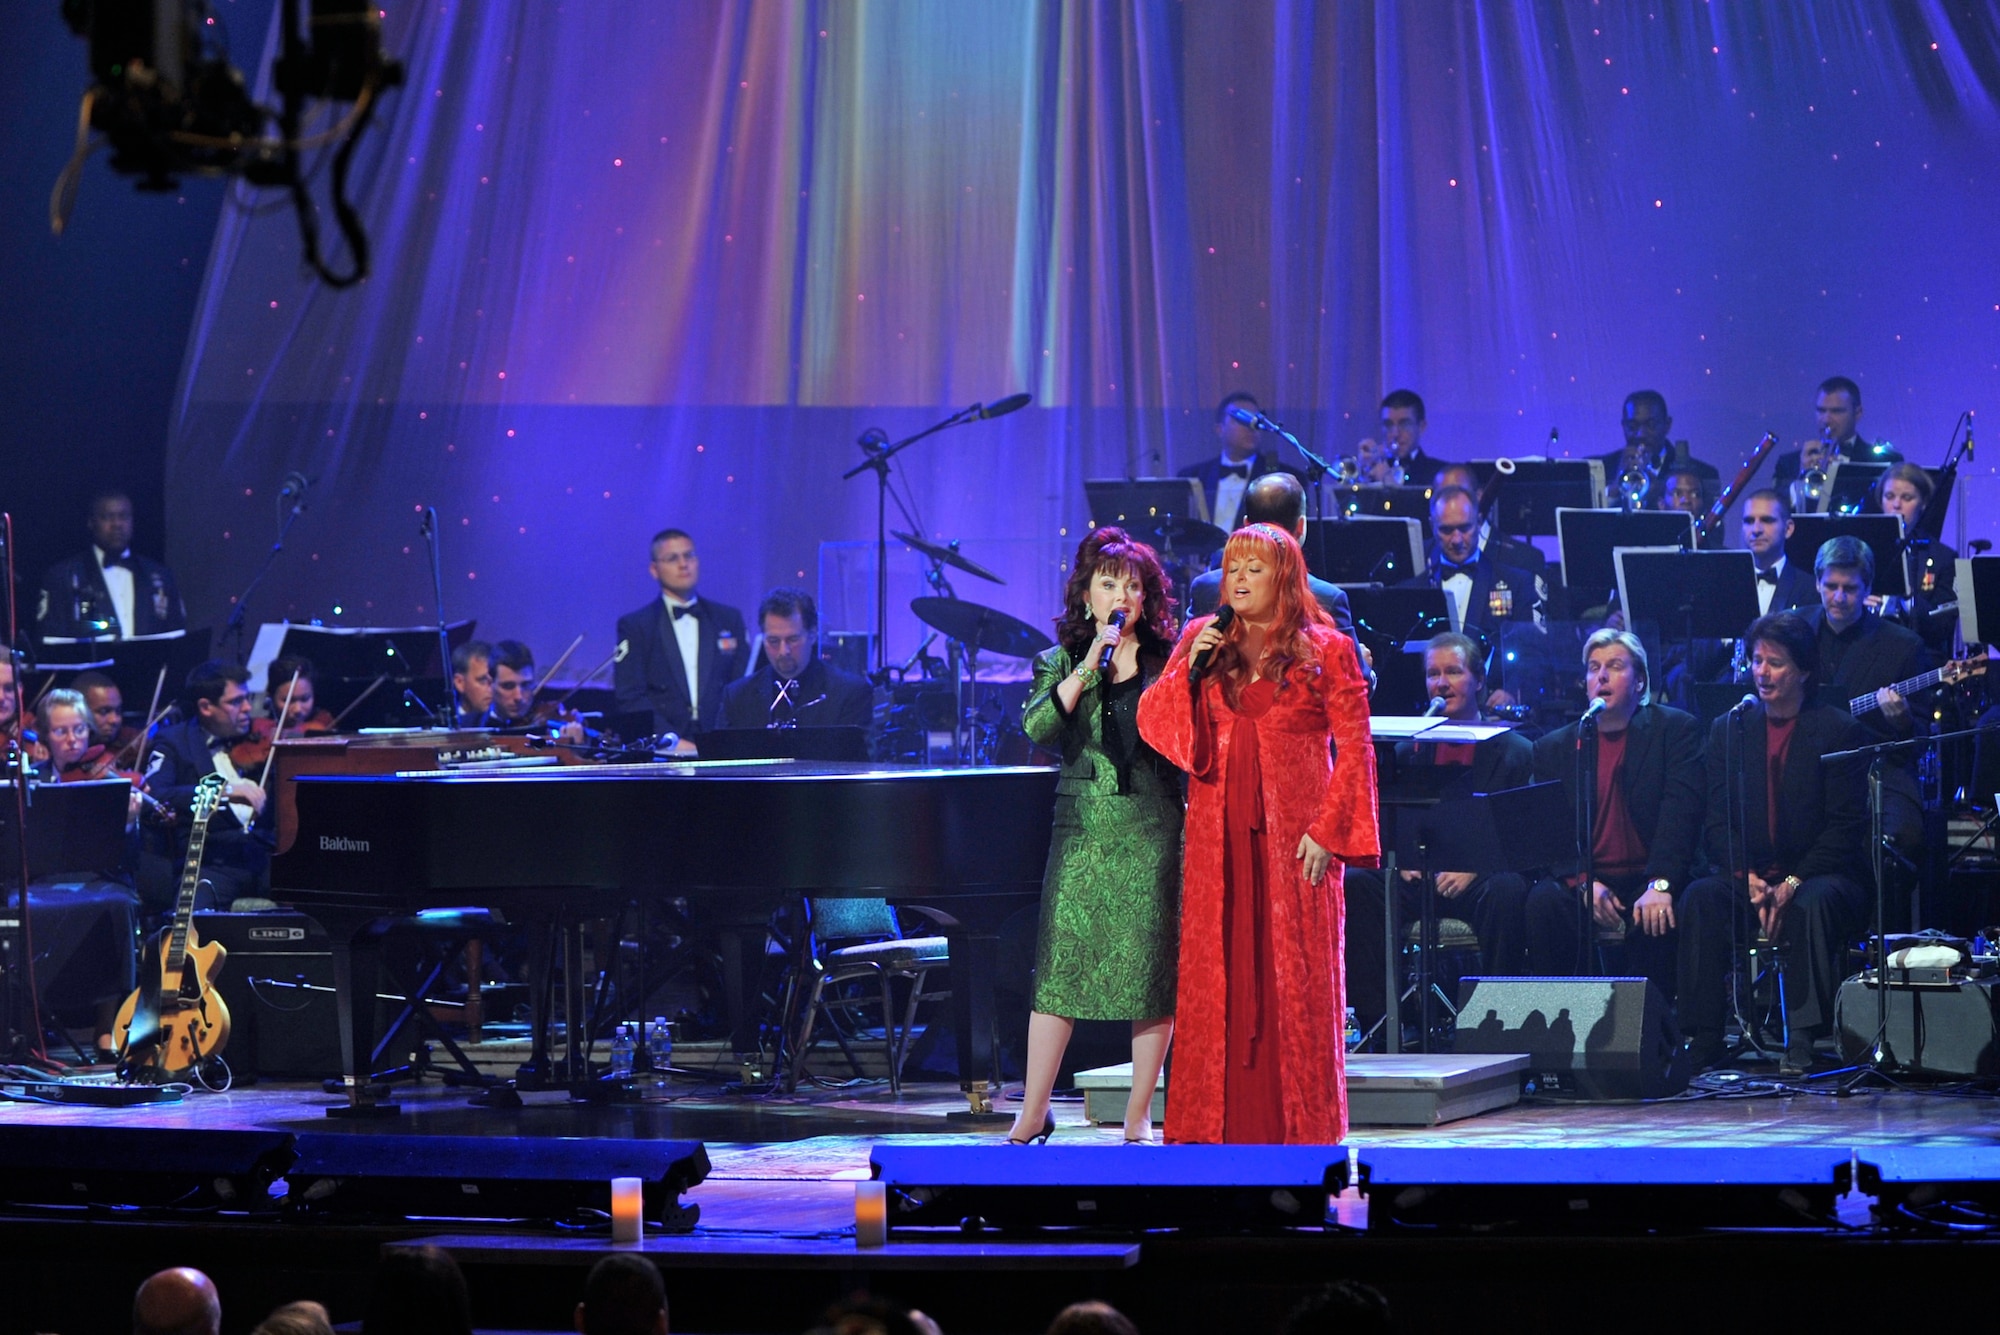 Country music artists Wynonna and Naomi Judd sing classic holiday music while the Band of the Air Force Reserve and Air Force Strings perform in the background during the 2008 Holiday Notes from Home concert recorded Oct. 6.  The concert is annual holiday event recorded at the Grand Ole Opry House in Nashville, Tenn., as a tribute to military men and women serving around the world.  The show airs on Great American Country throughout December and also on American Forces Network channels for service members and their families stationed overseas.  (U.S. Air Force photo/Ken Hackman)